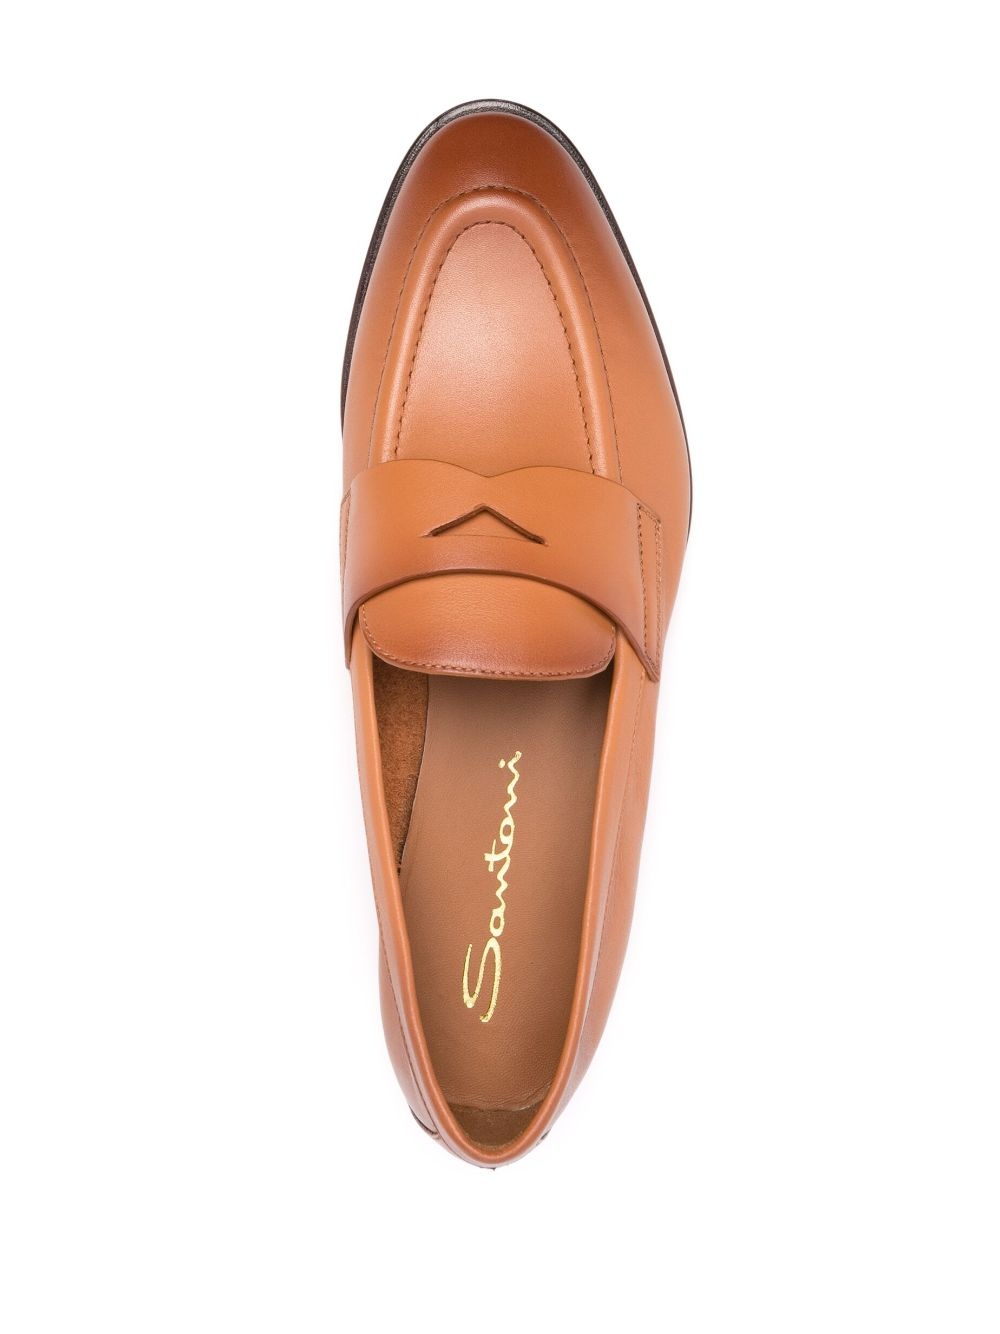 flat-sole leather loafers - 4